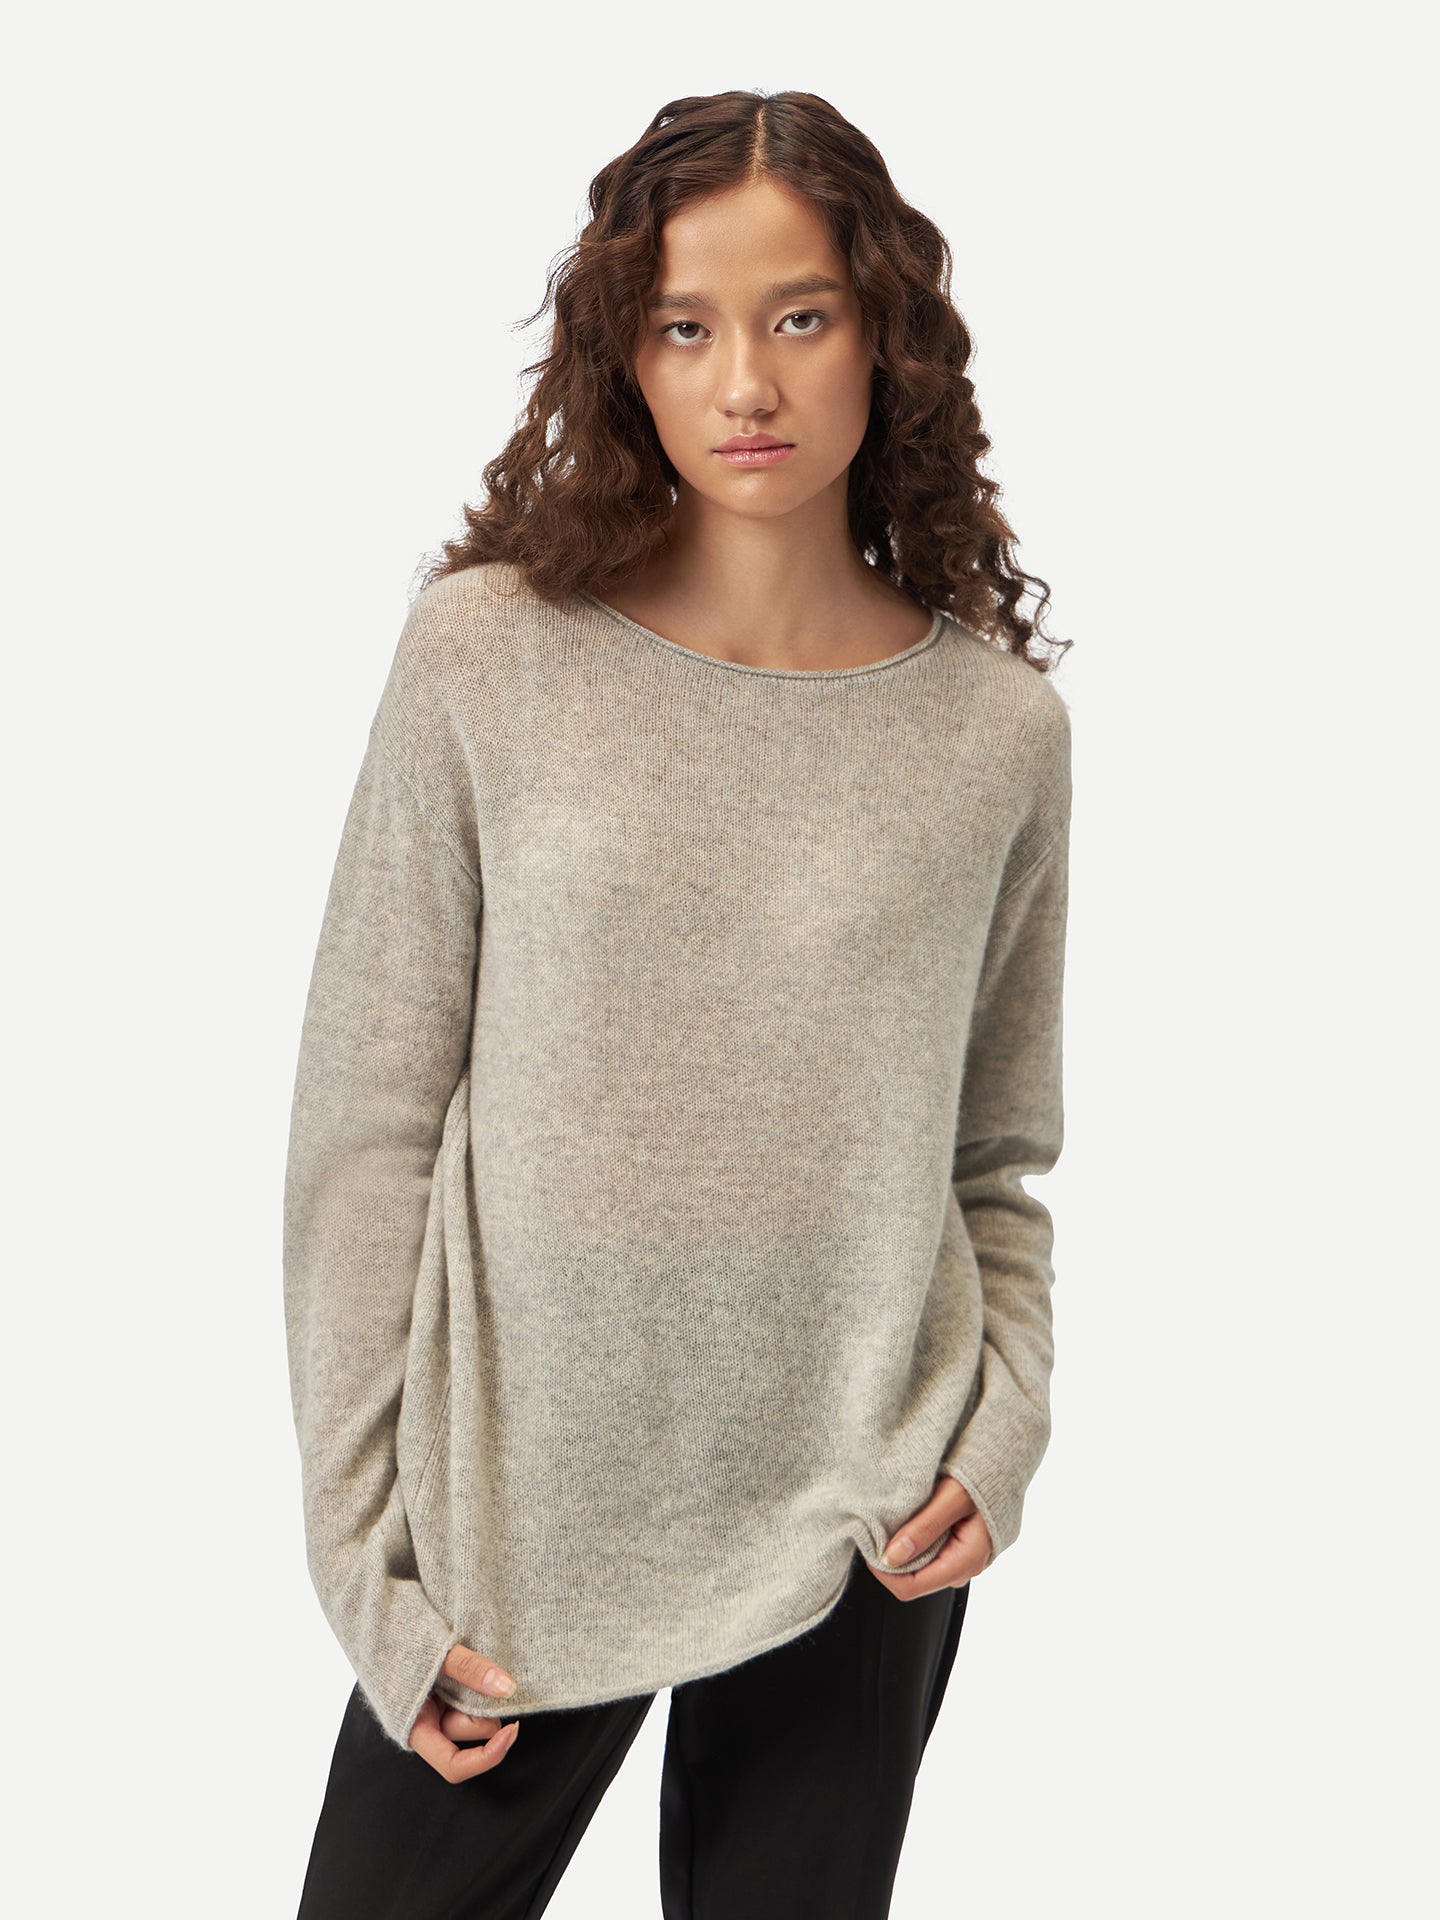 Elegant Cashmere Sweaters for Women